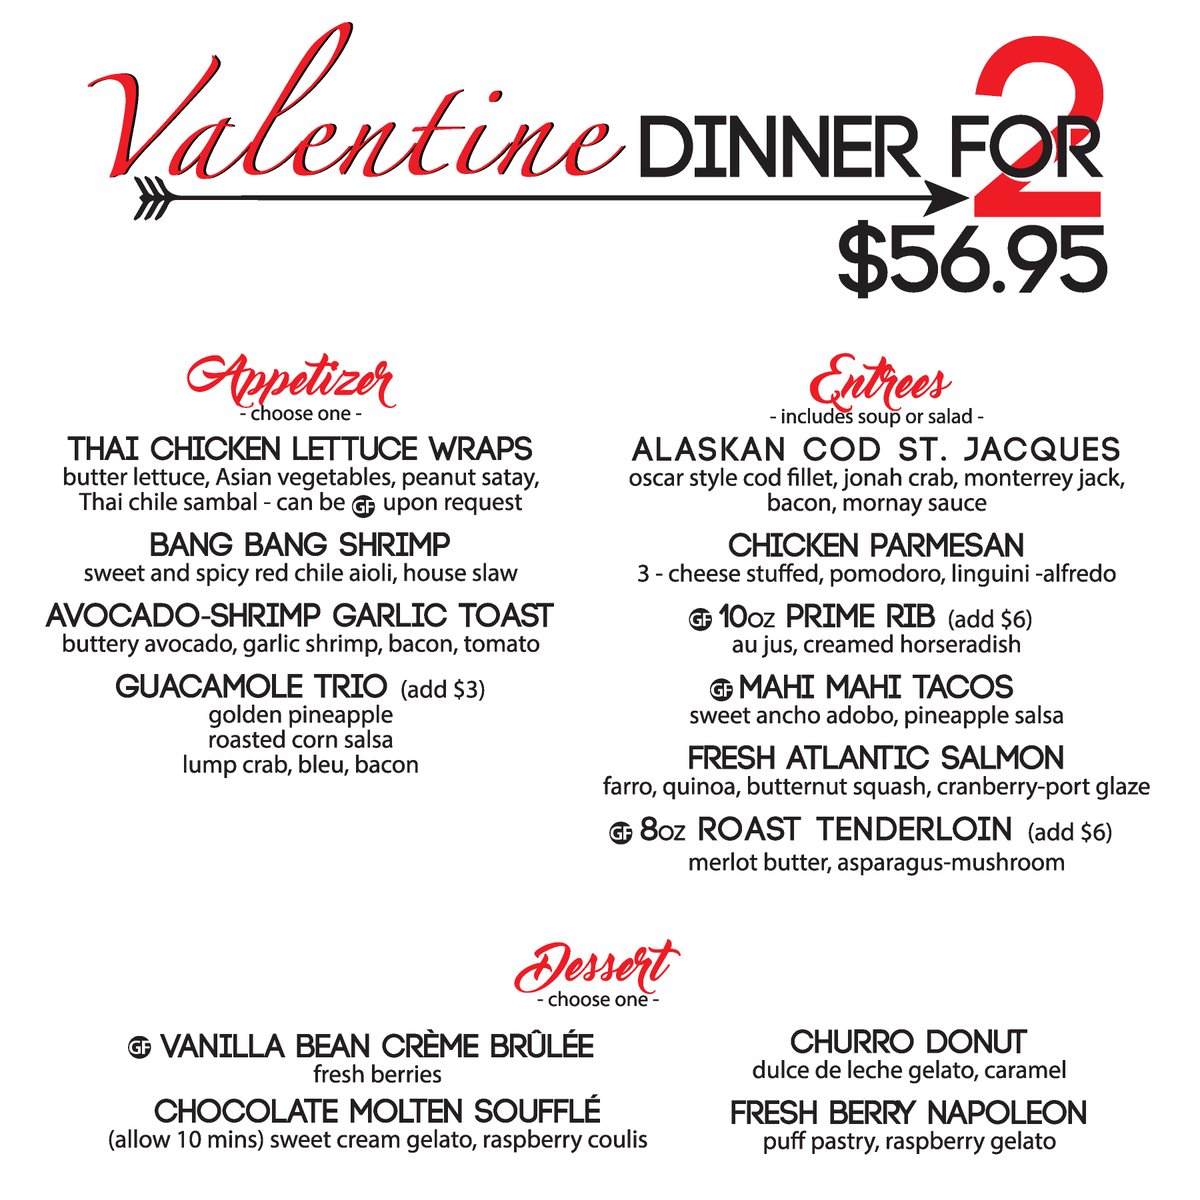 BEE My Valentine! Valentine's Special Menu ALL week long. Bring your Valentine and enjoy a special Beehive menu made specifically for lovers. Call NOW for your reservations. #BEEmine #alwaysgoodeats #BeehivePubAndGrill